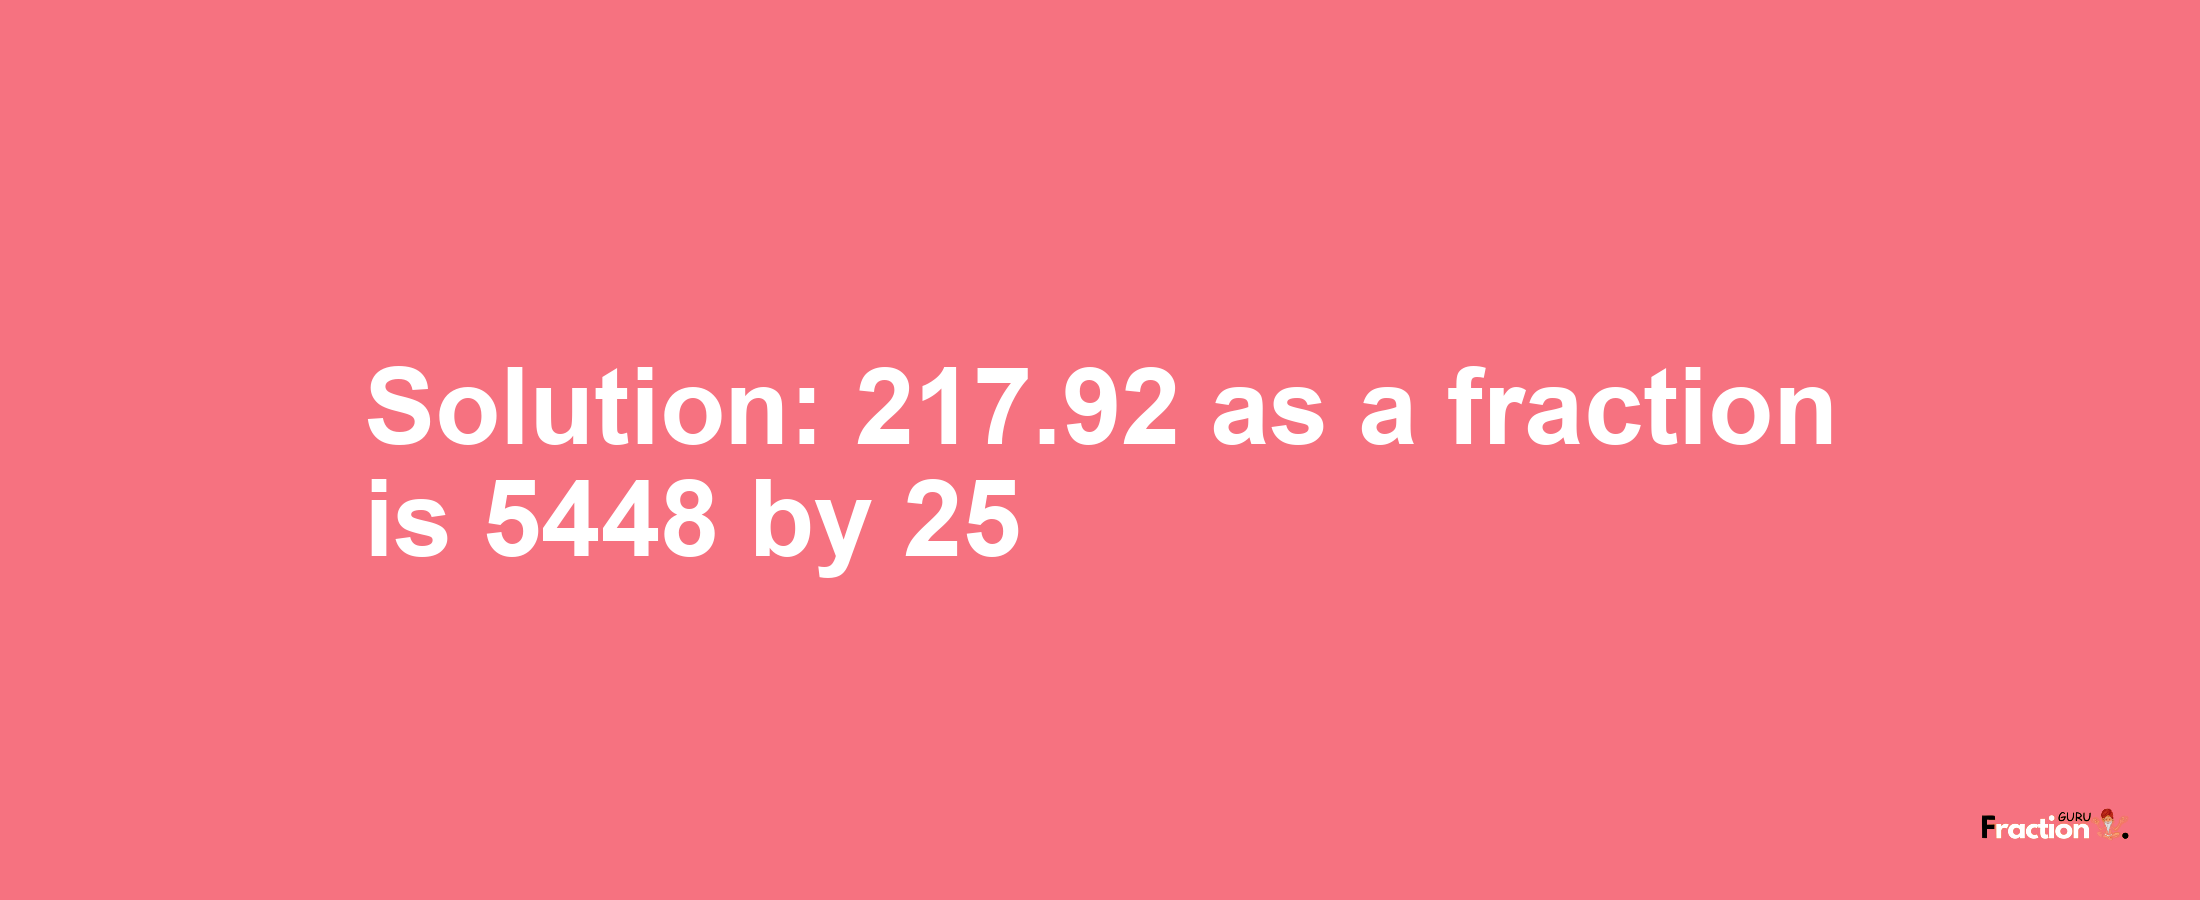 Solution:217.92 as a fraction is 5448/25